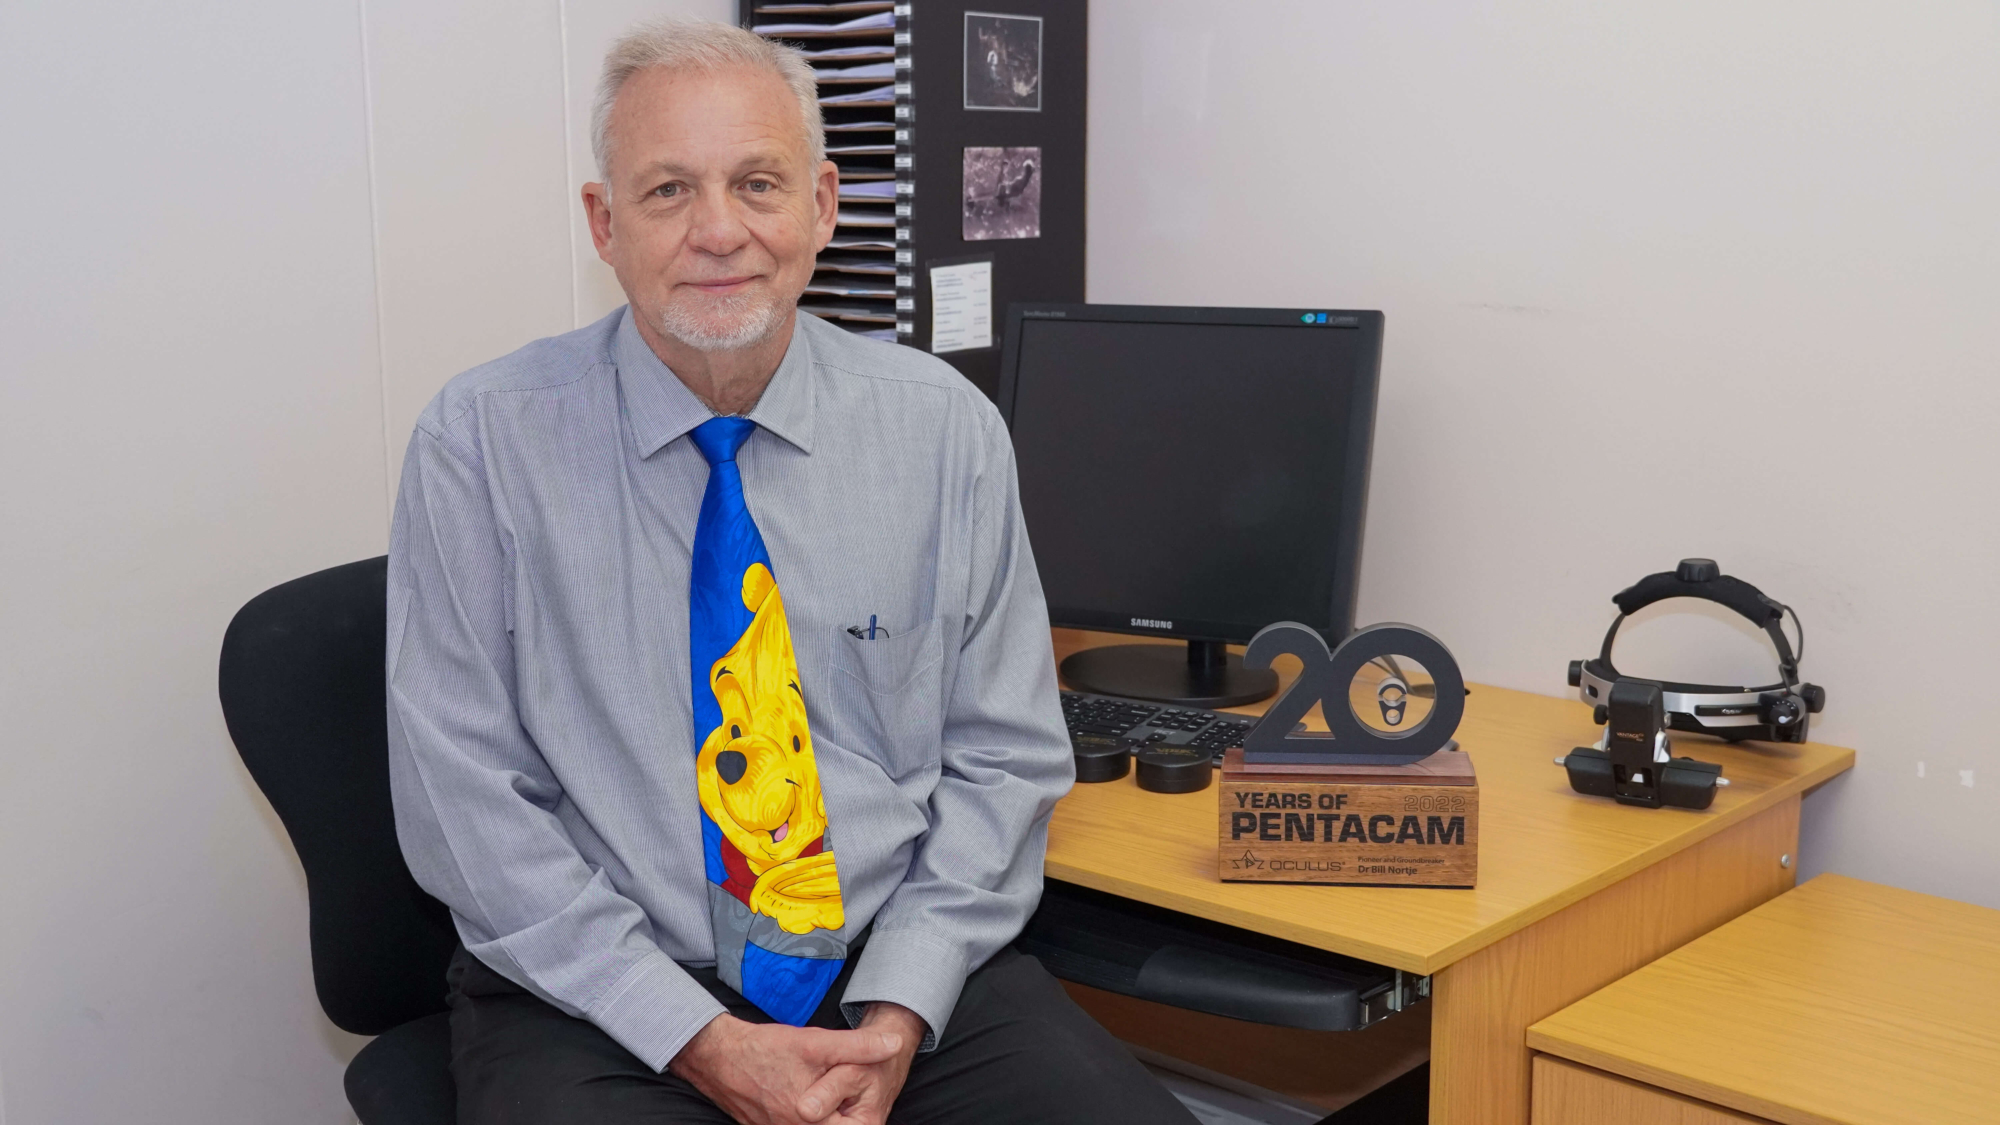 Dr Bill Nortje at his desk with the 20th Anniversary Pentacam® Trophy.